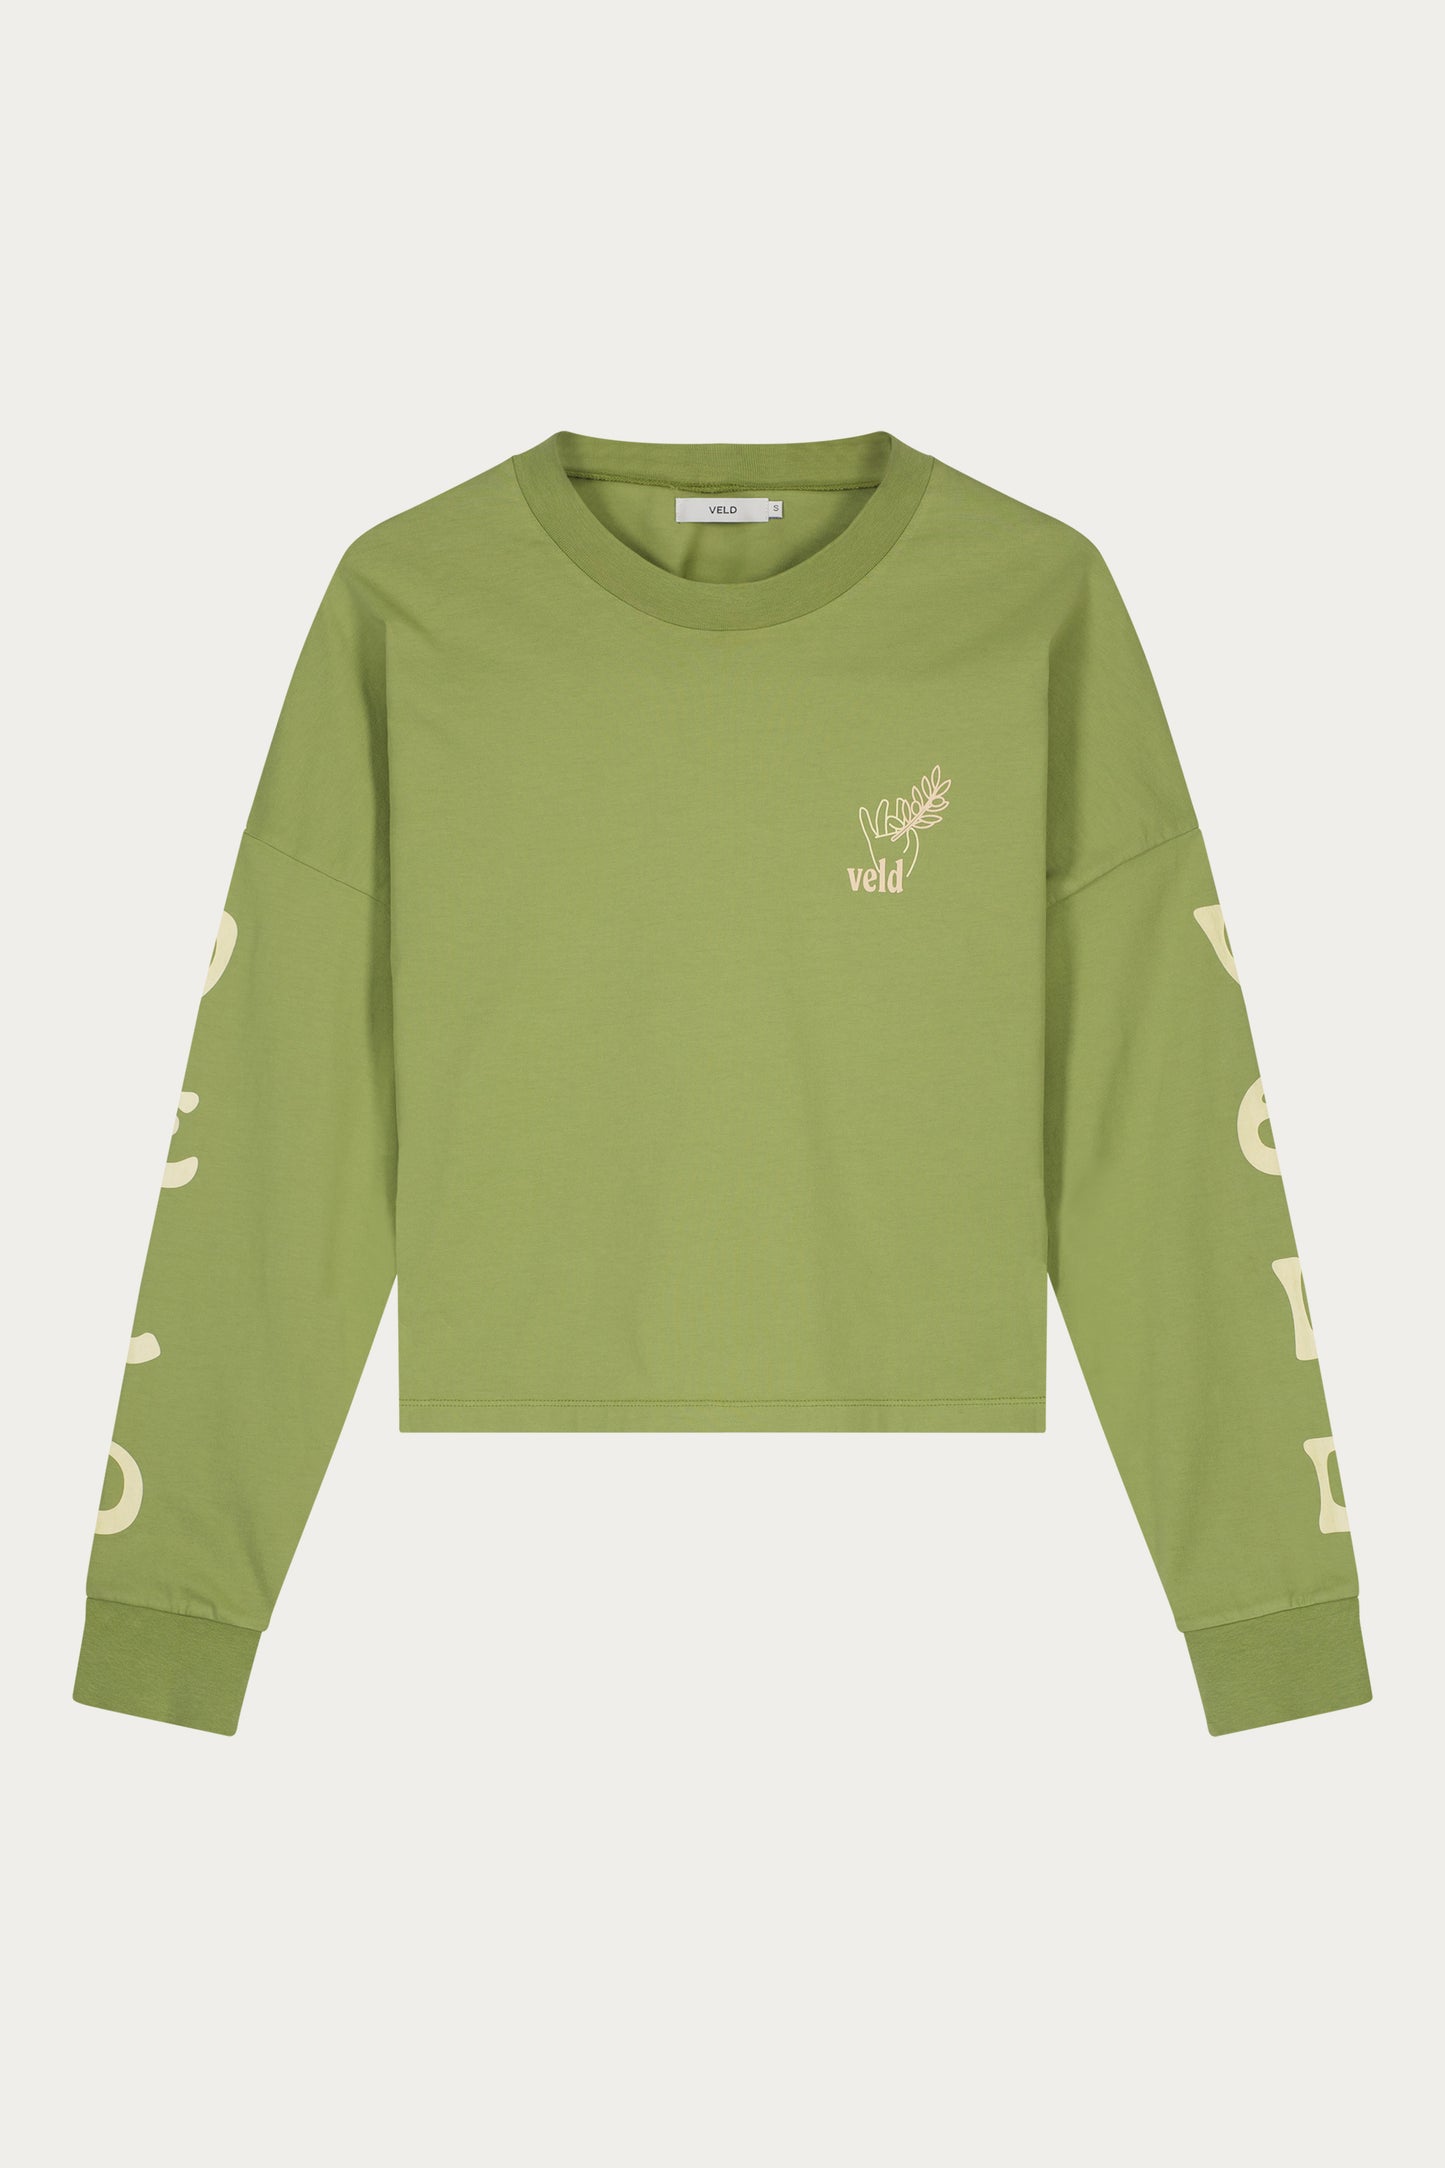 Vondel Cultivate Kindness Long Sleeve T-Shirt - Turtle Green